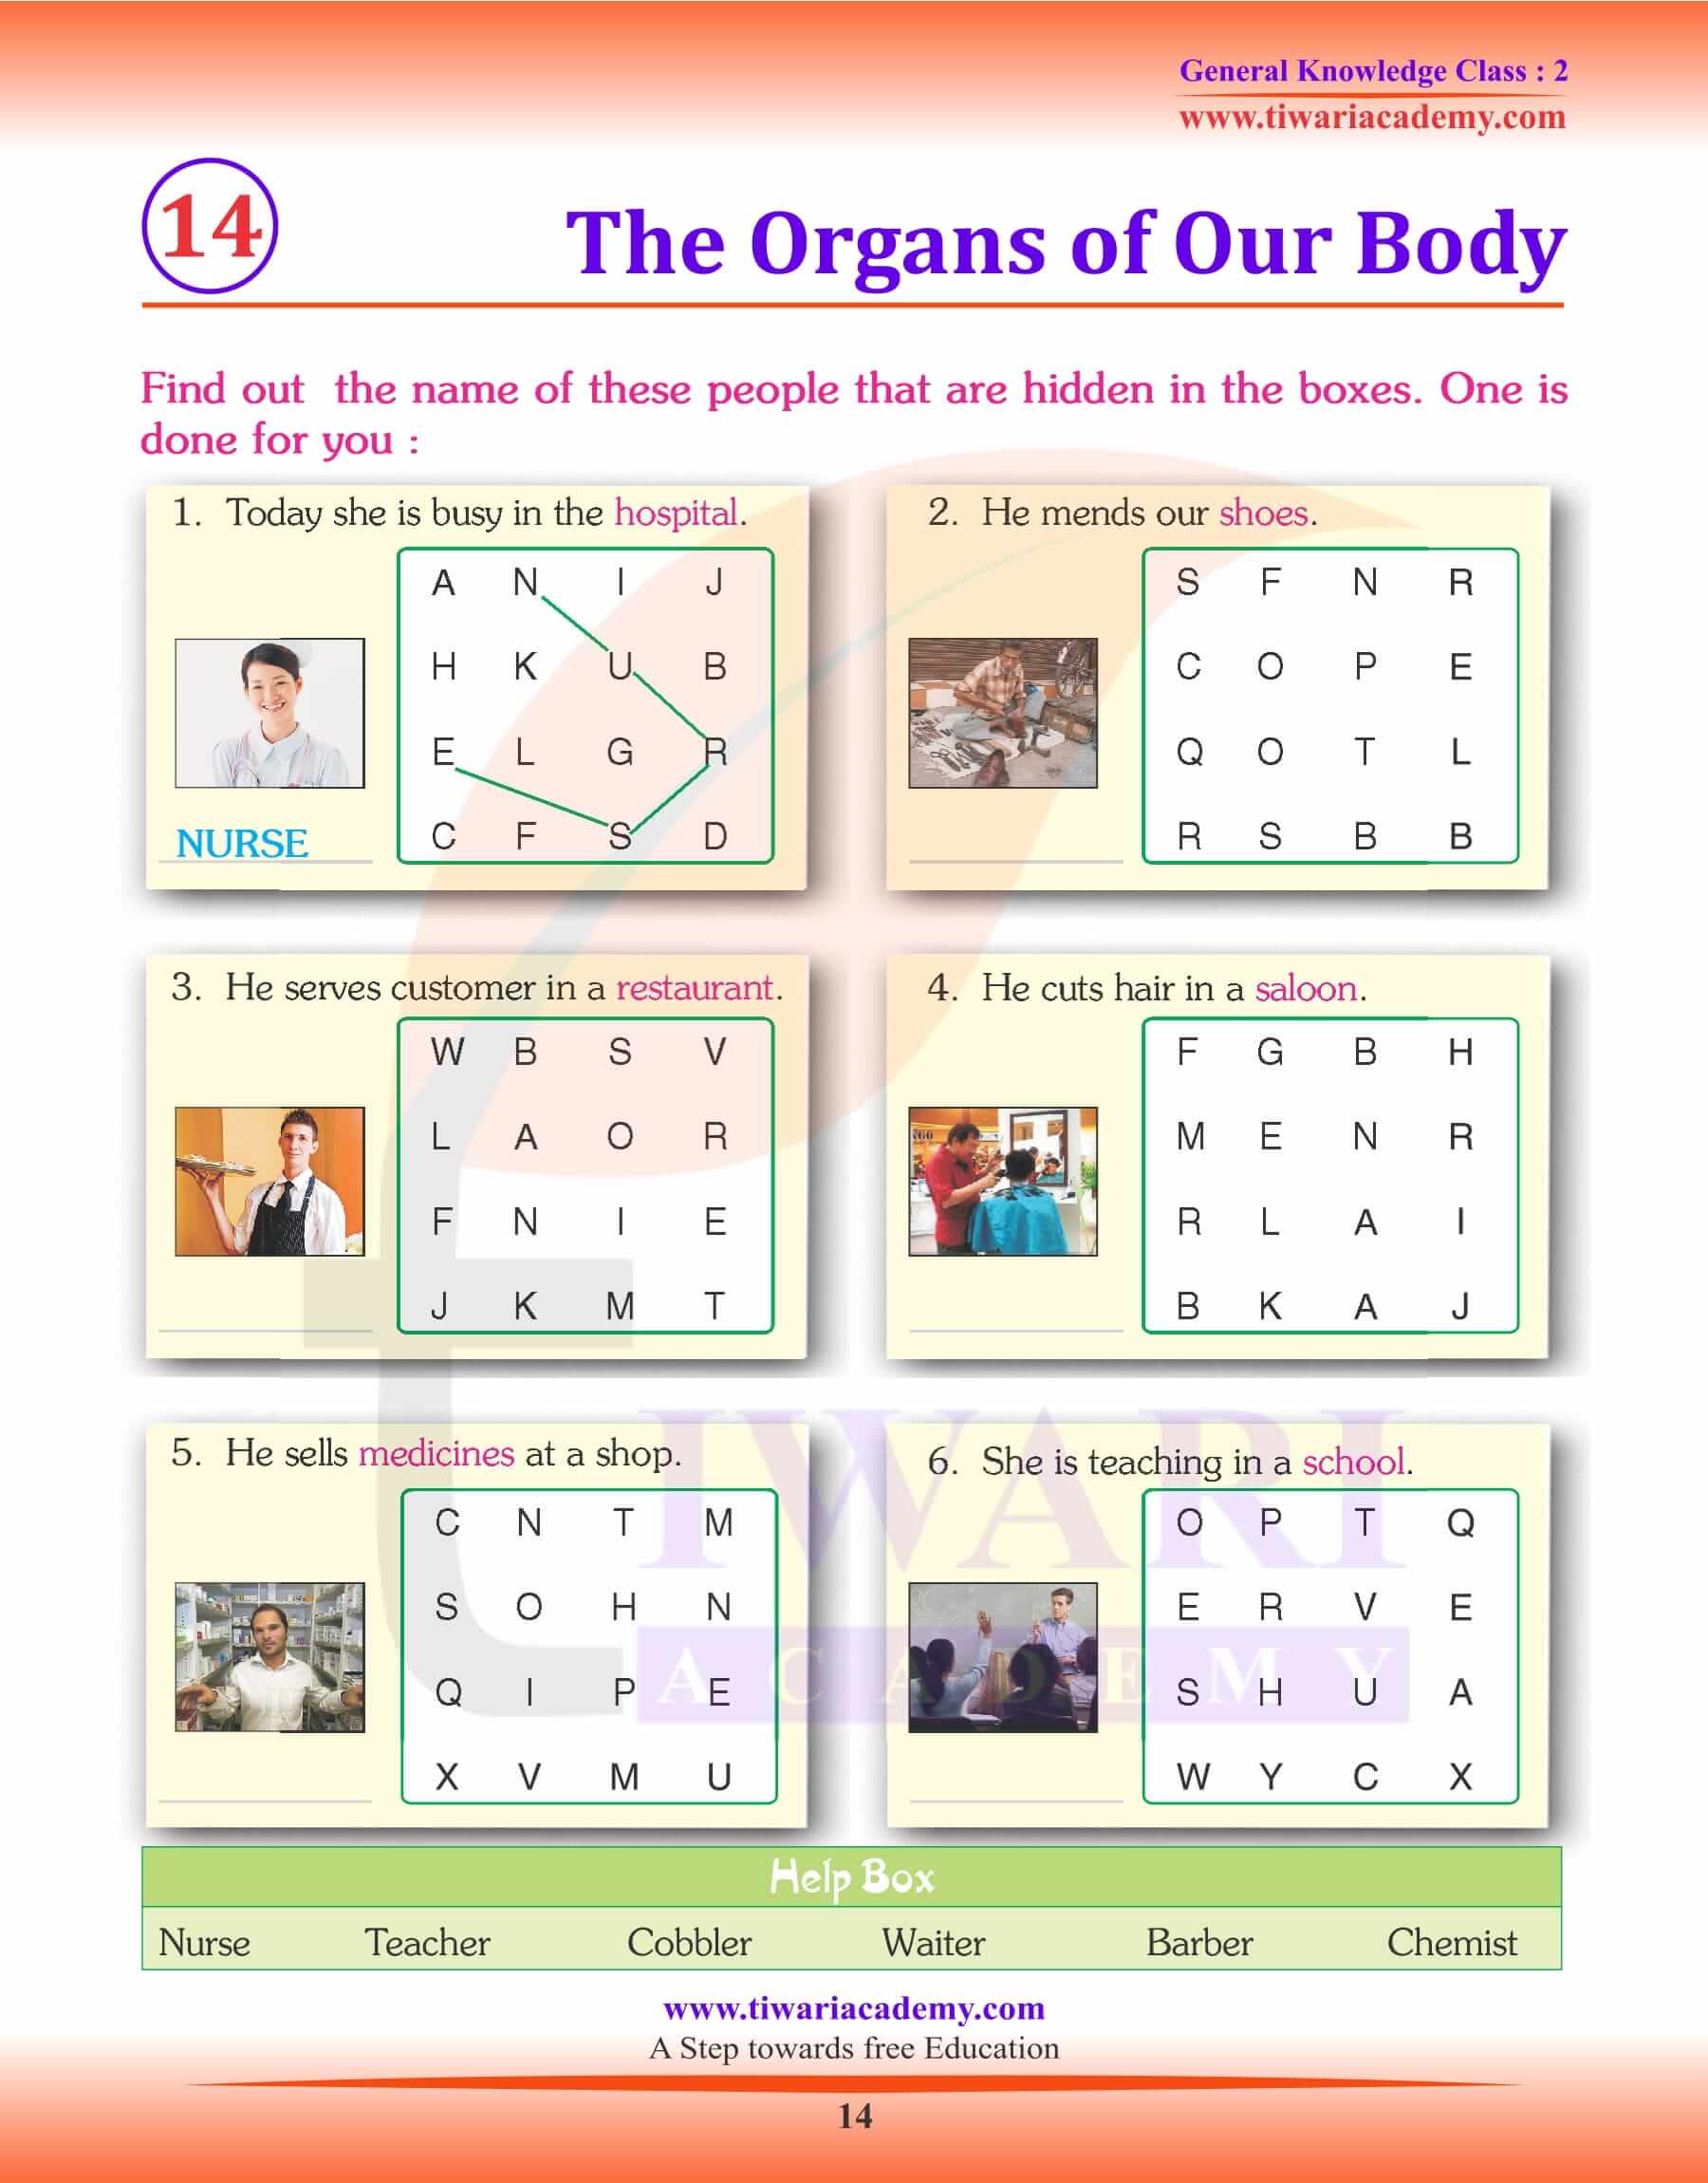 The Organs of our Body